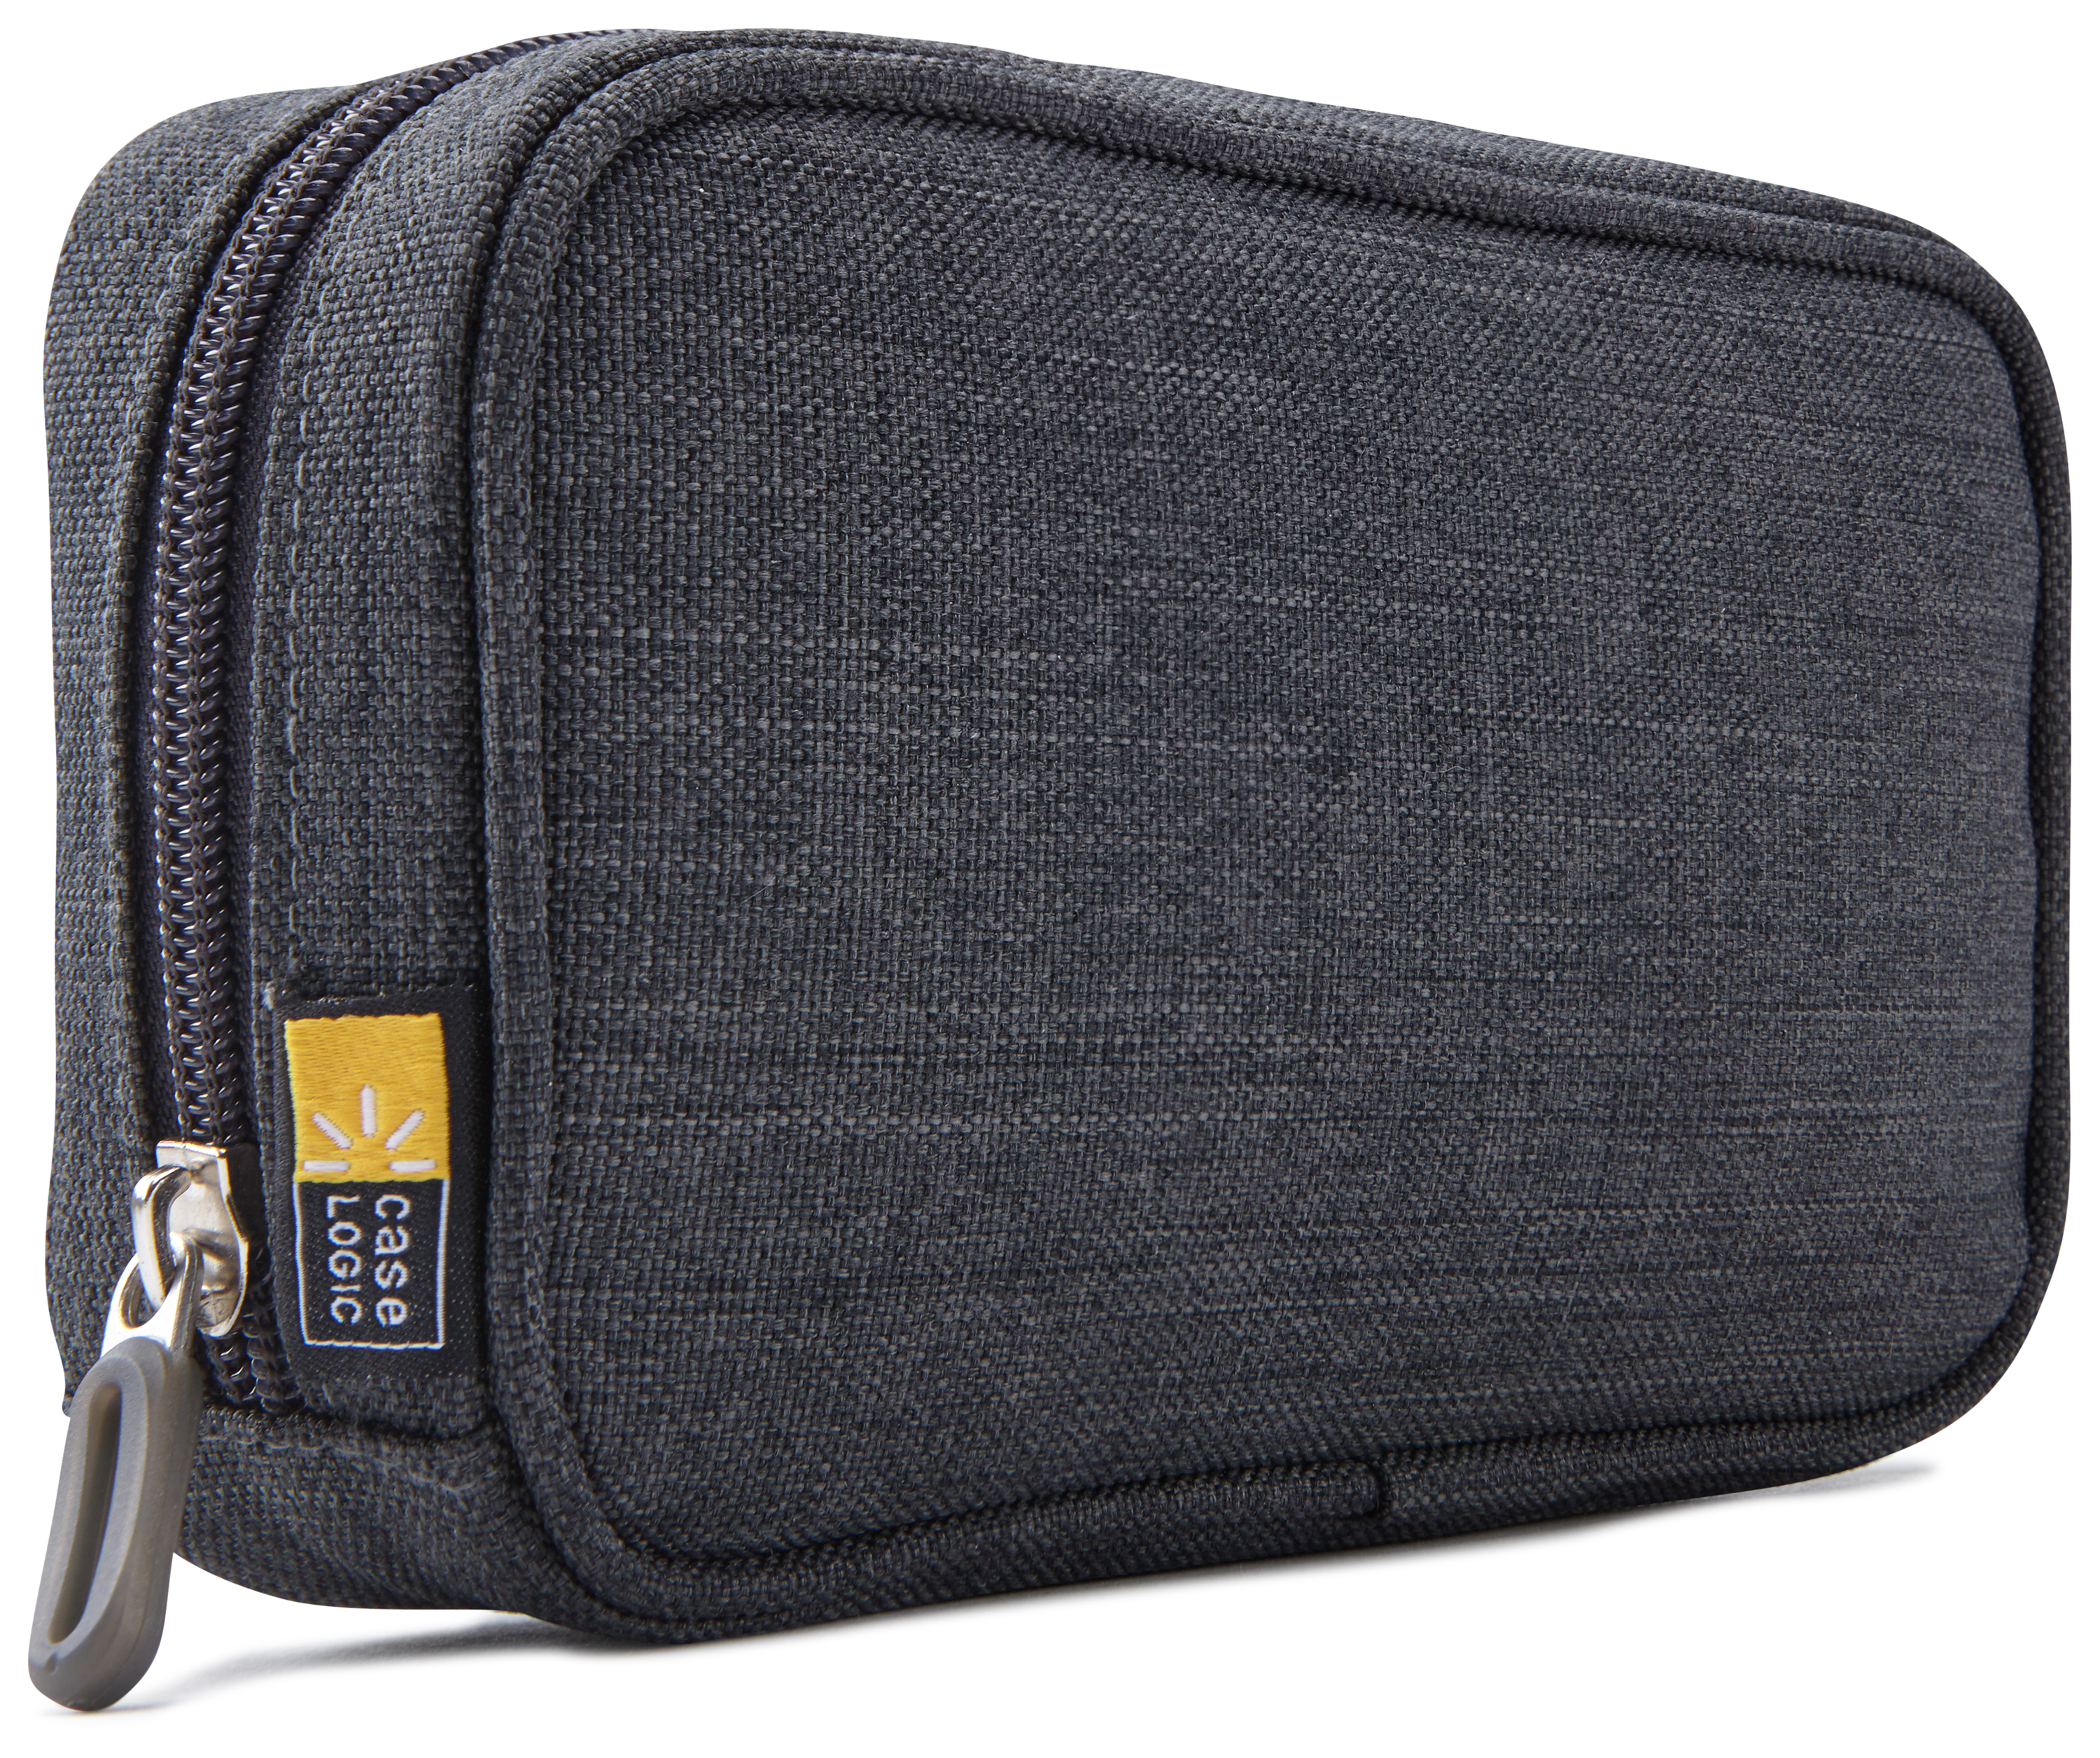 Case Logic Berkeley - Protective case for portable HDD / external battery pack - polyester - gray